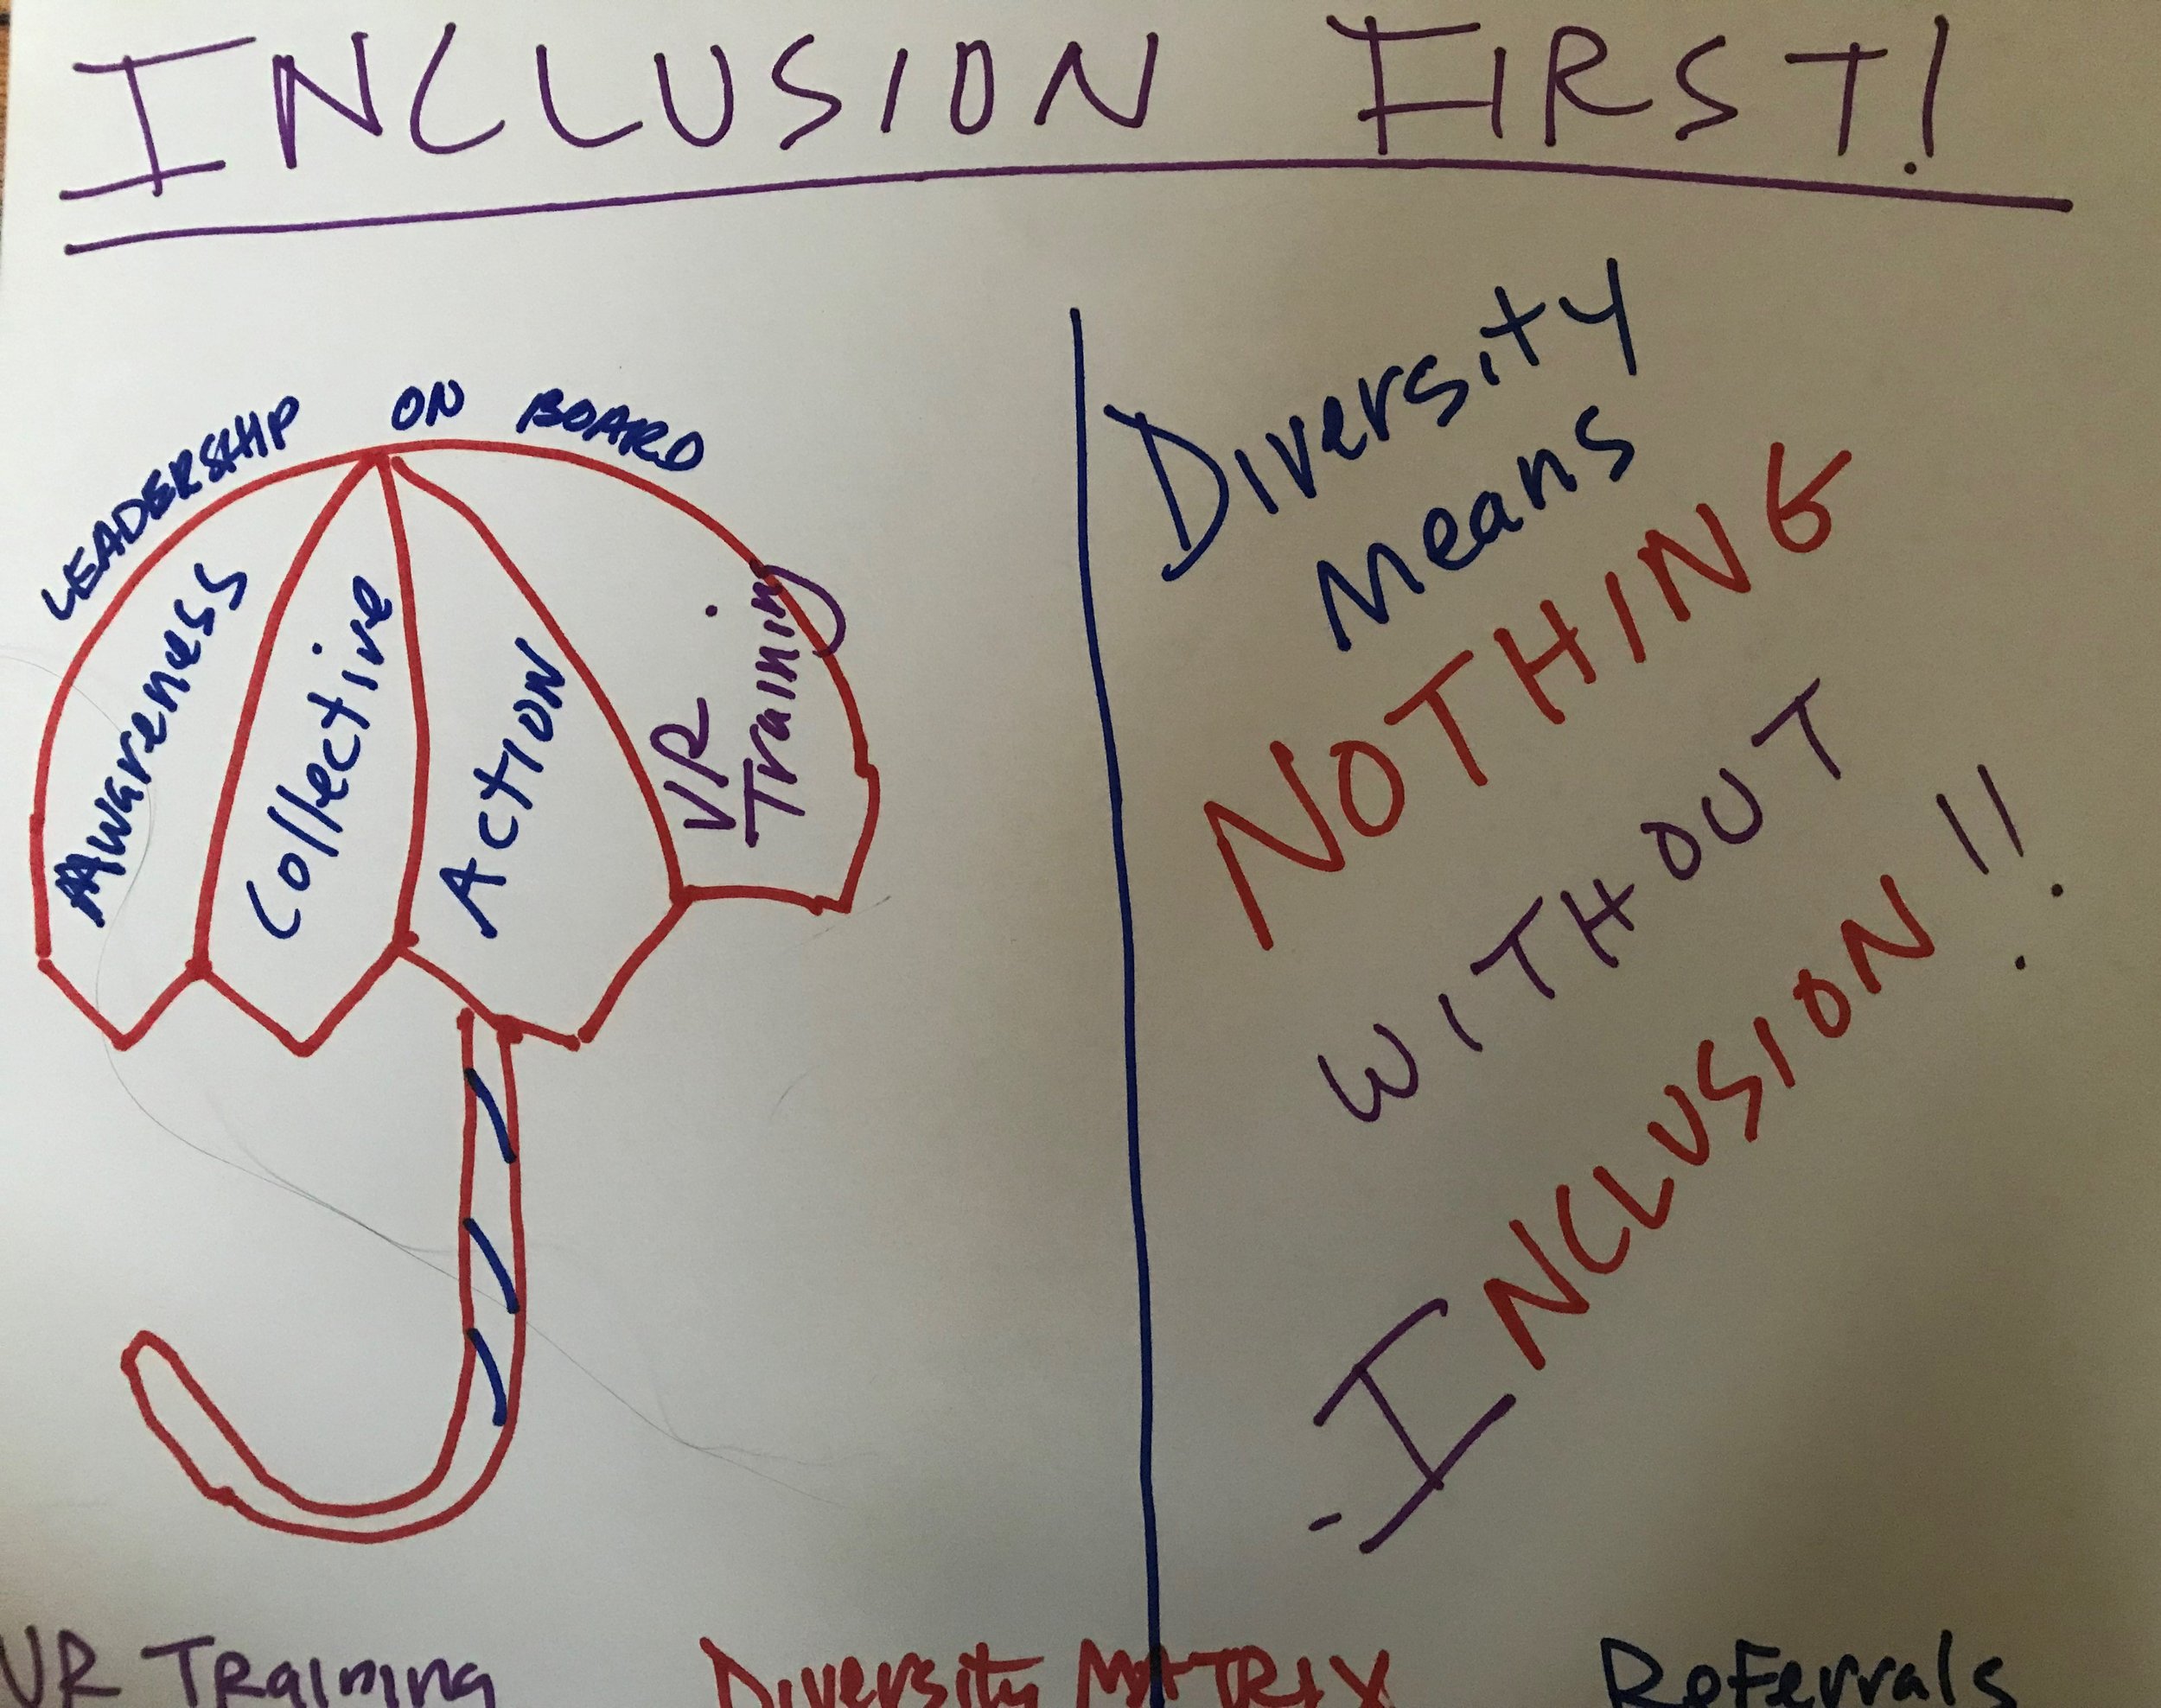 INCLUSION FIRST!